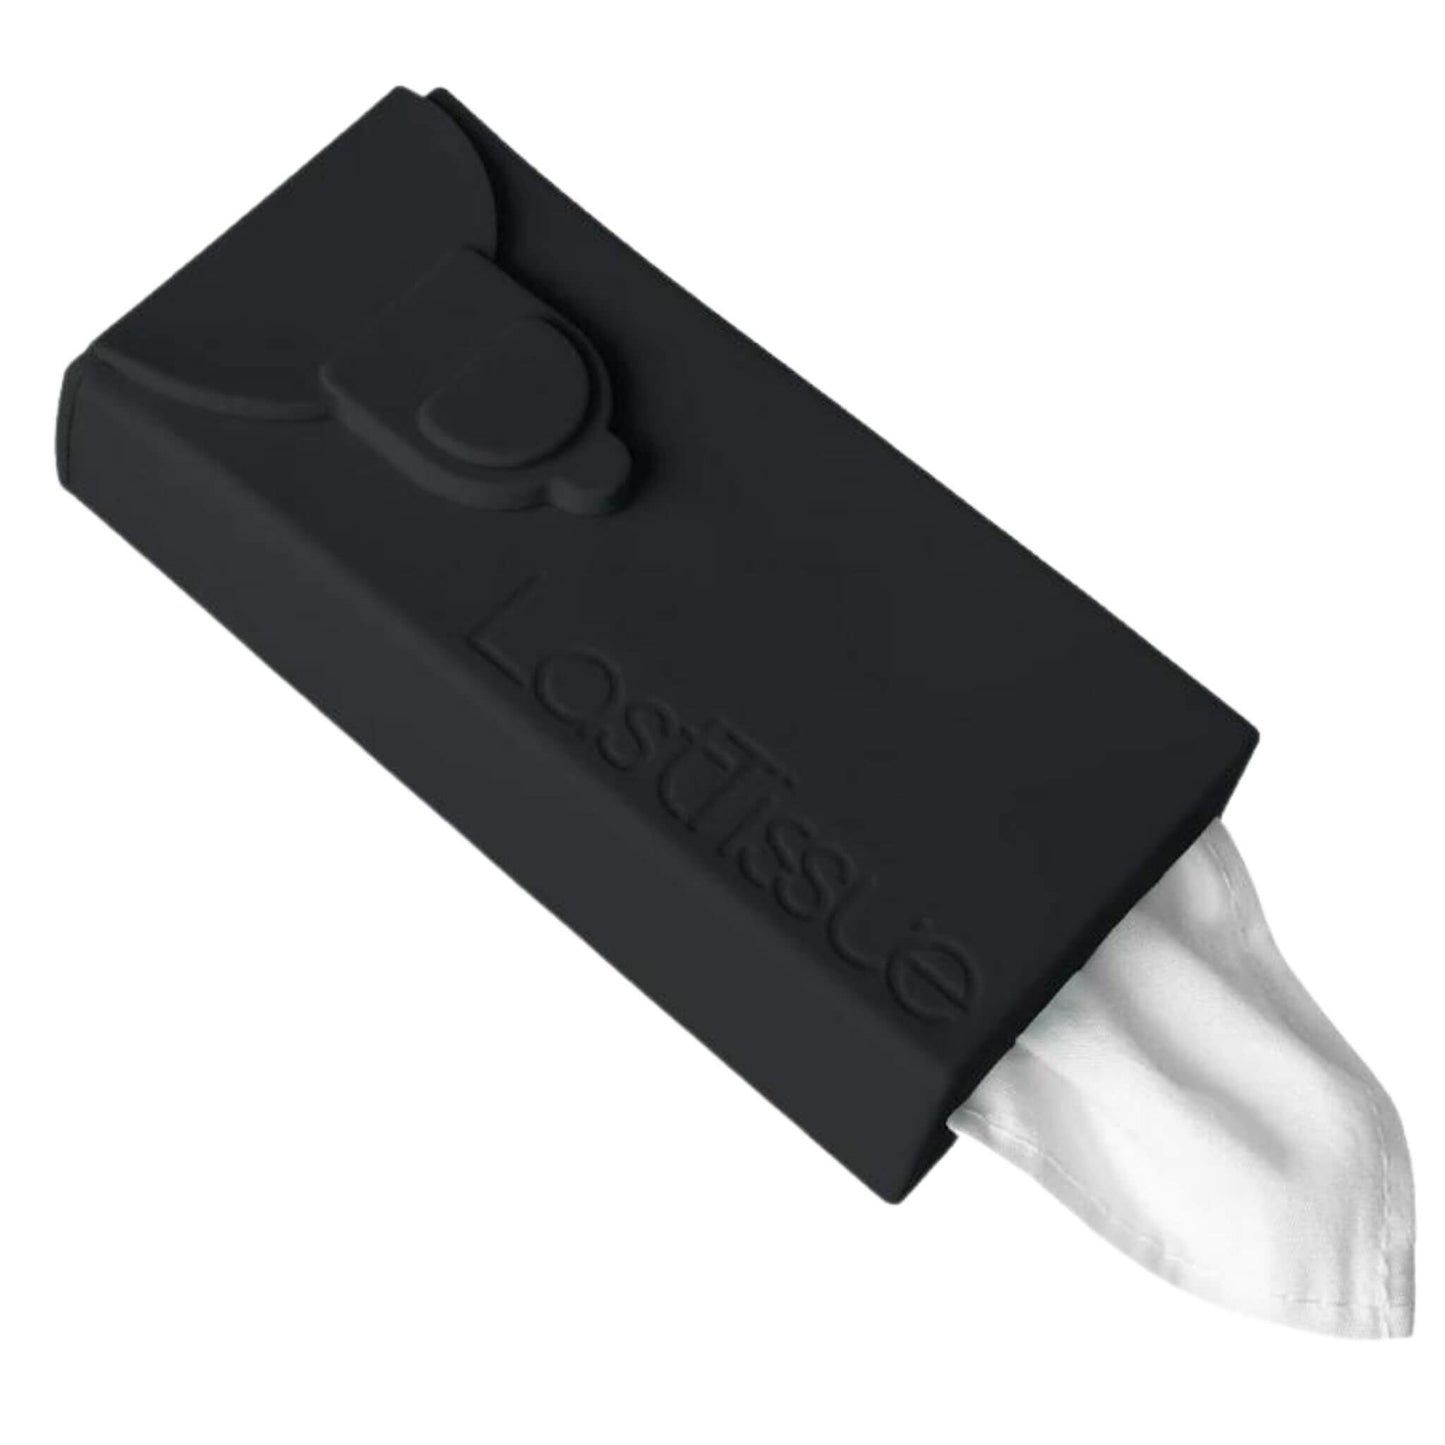 LastObject LastTissue reusable alternative to single-use tissues. Cotton tissues in black silicon carry case